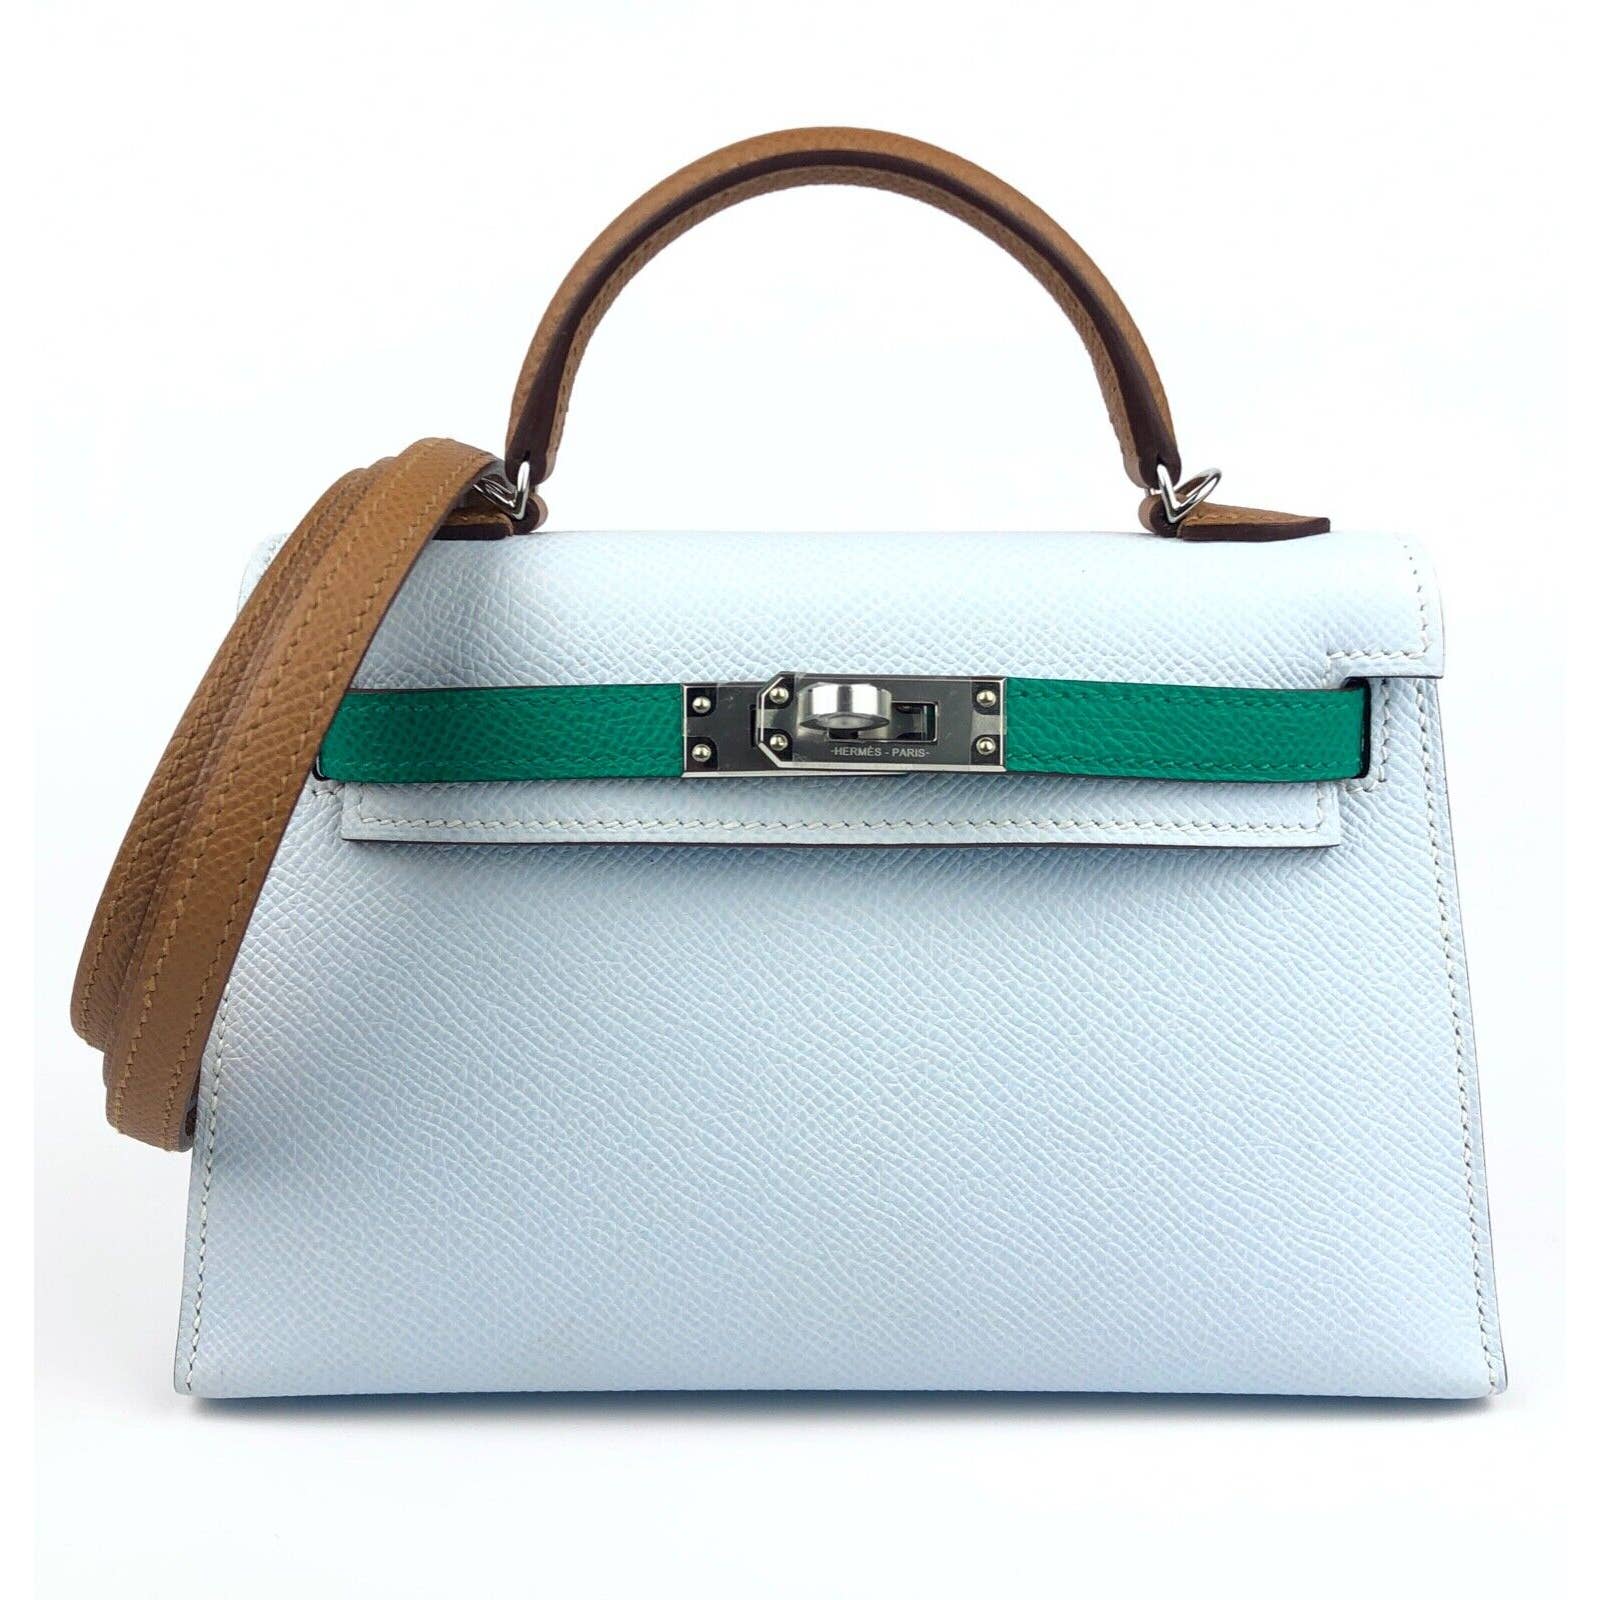 Hermès Mini Kelly Sellier 20 Top Handle Bag In Bleu Brume, Vert Jade And  Gold Epsom Leather With Palladium Hardware in Blue